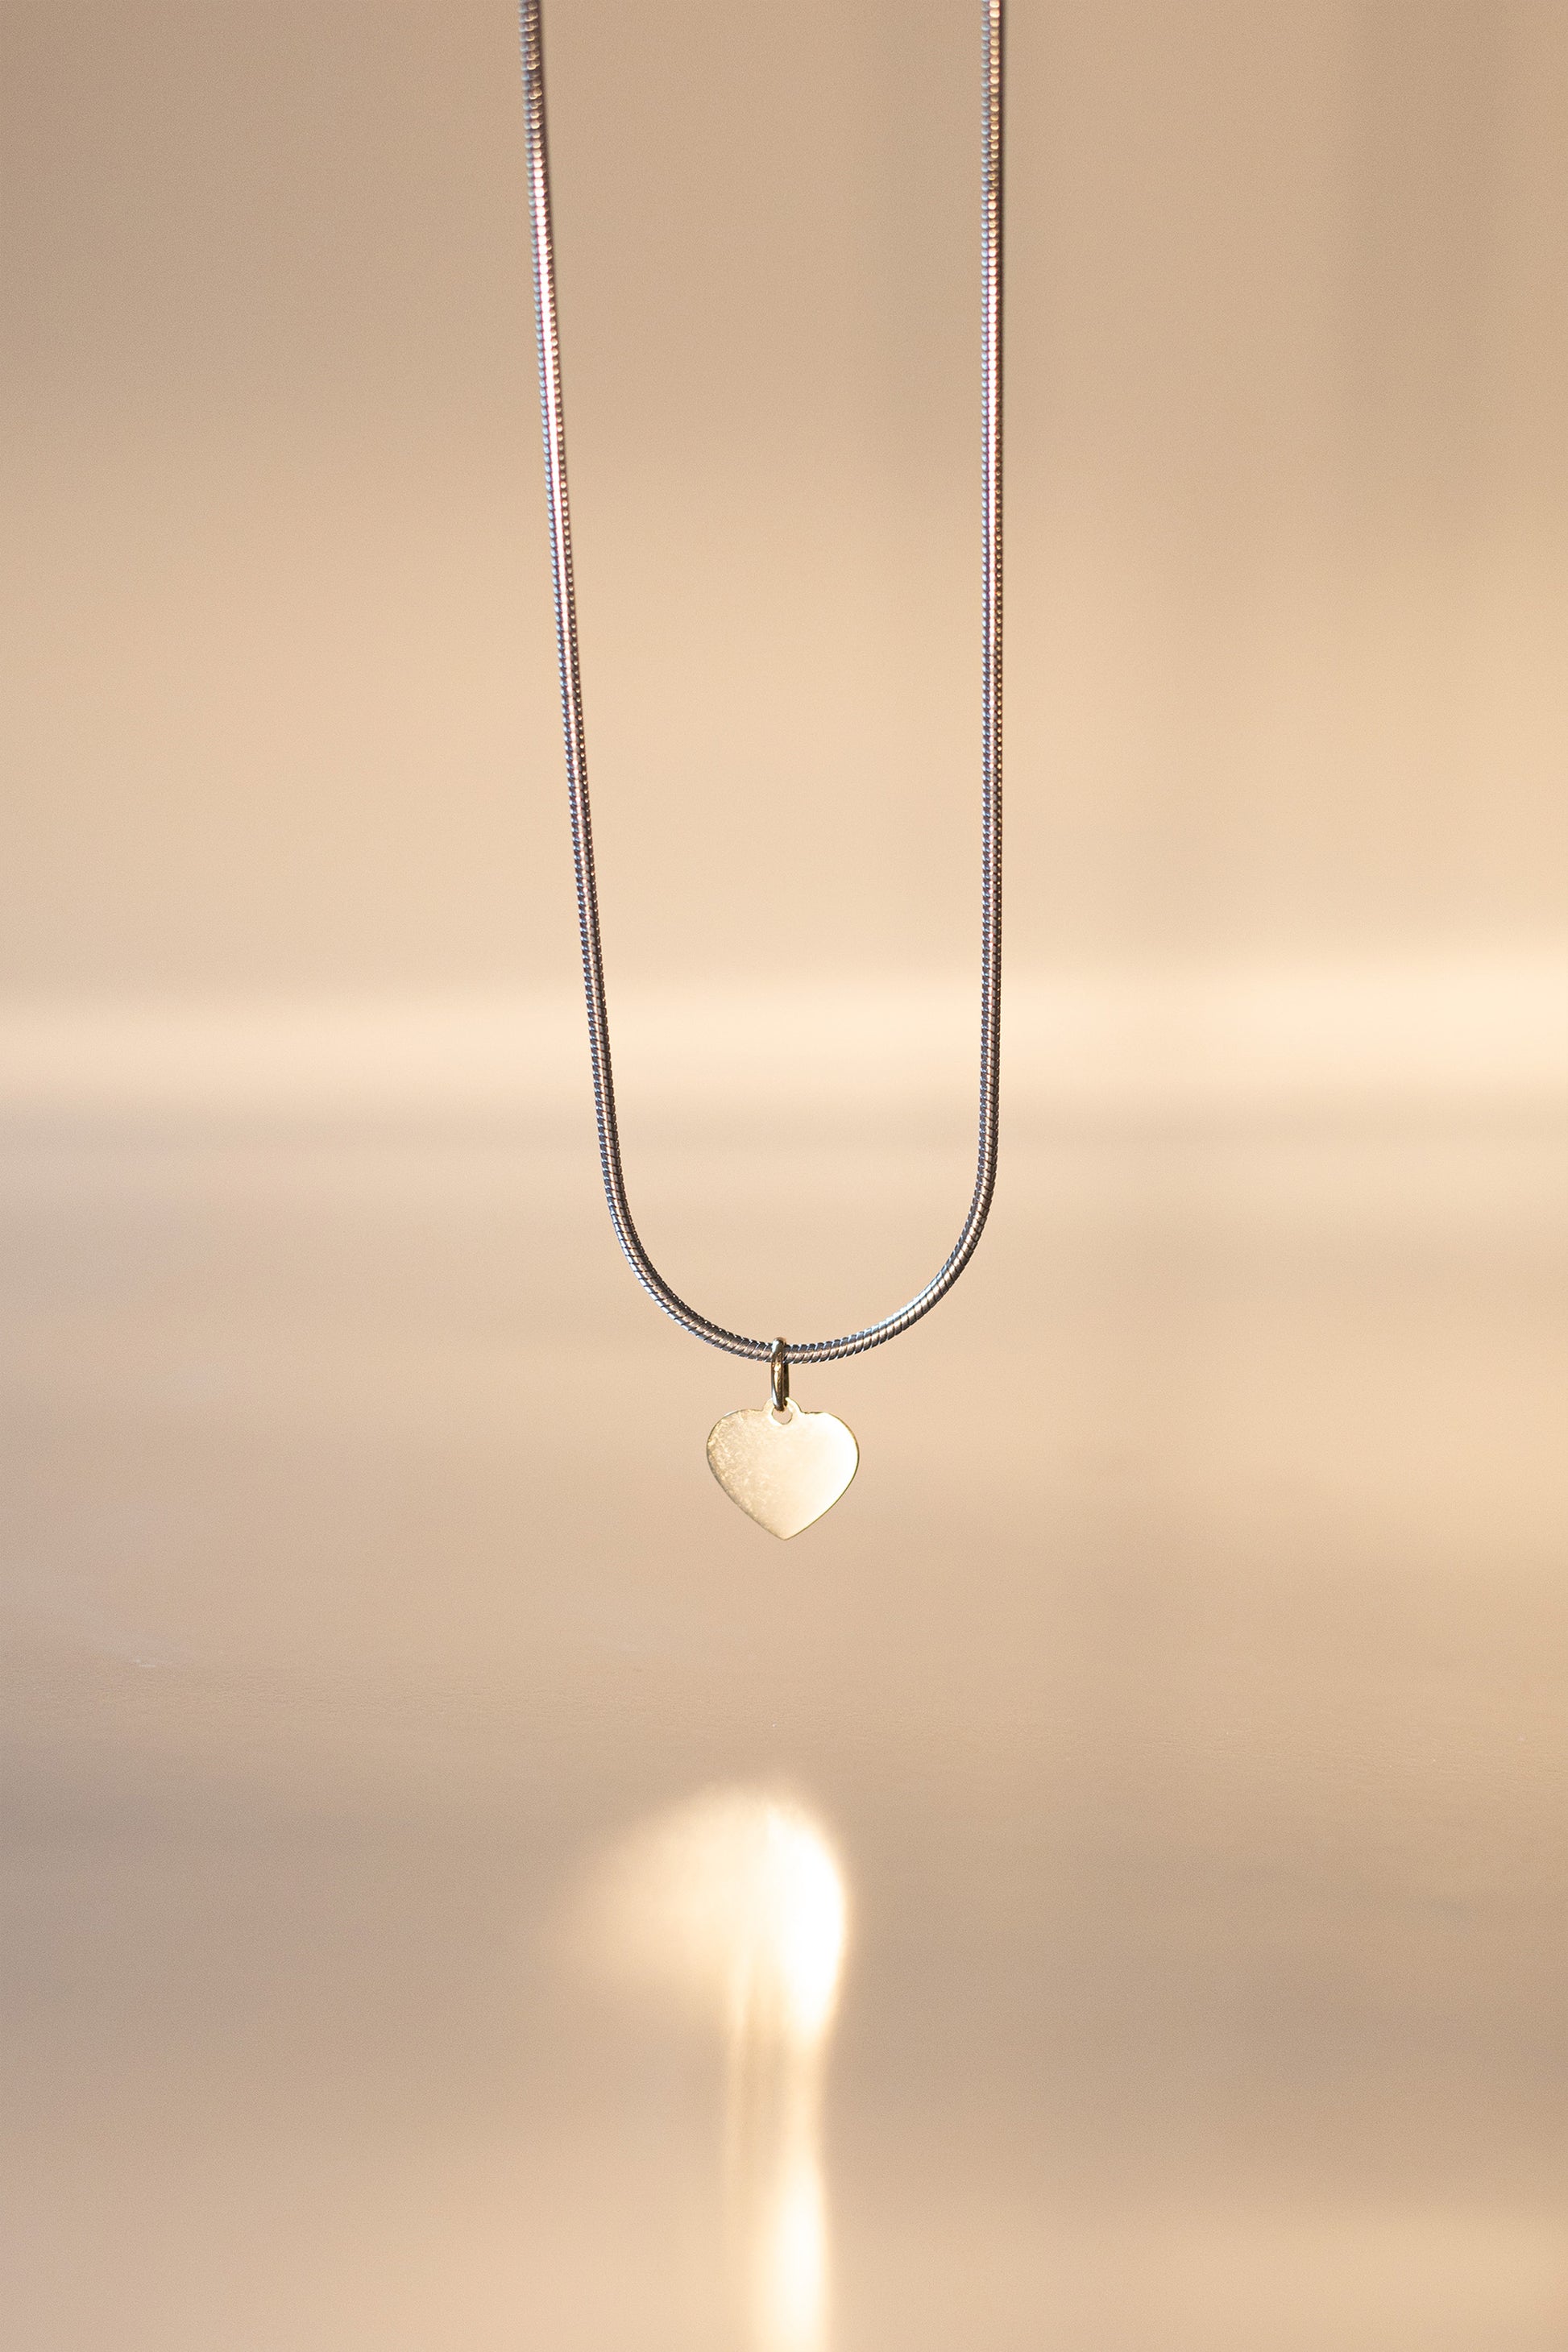 The love necklace